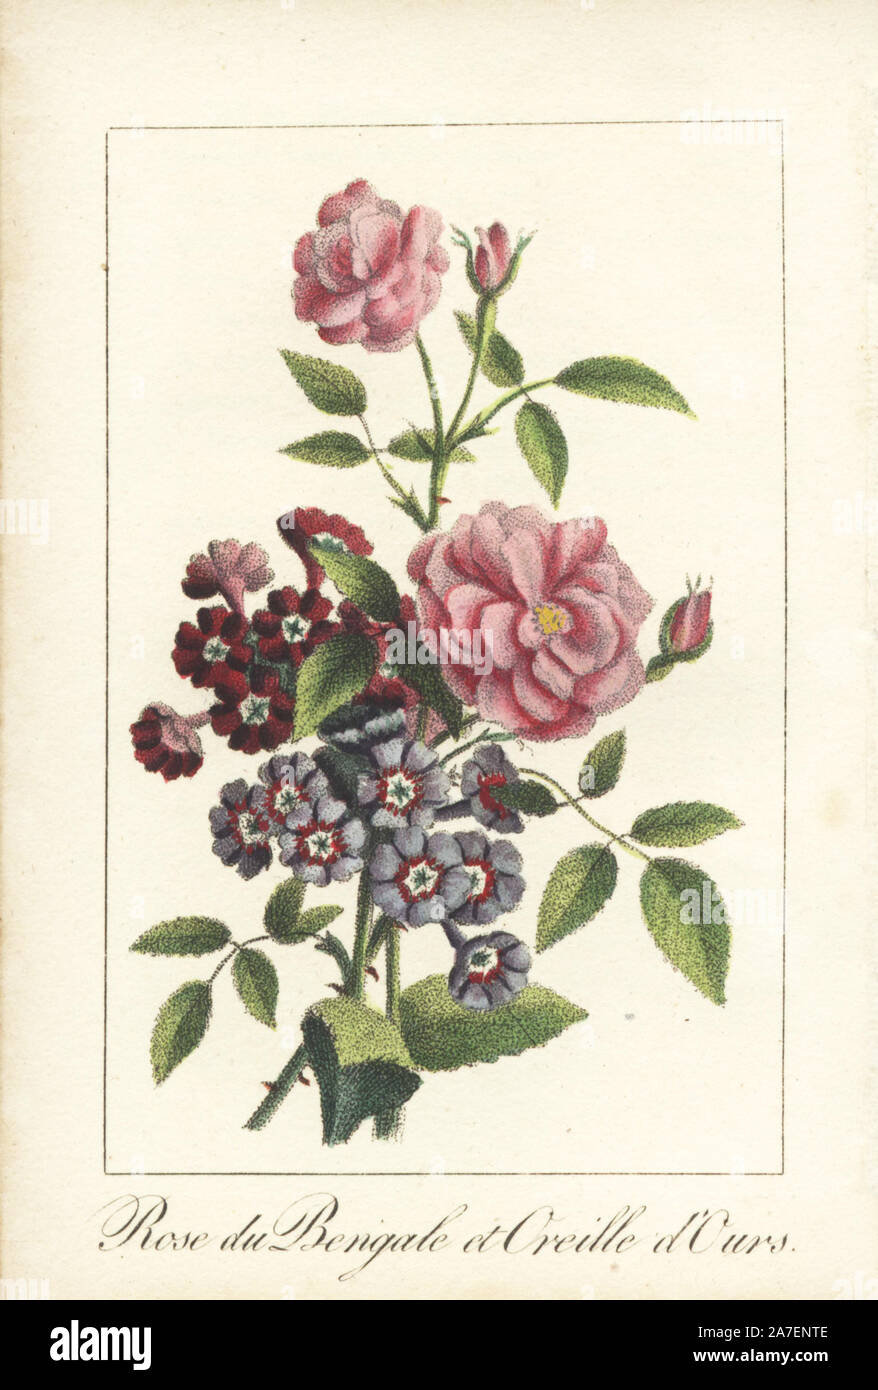 Indian rose, Rose de Bengale, Rosa indica, and Primula auricula, oreille d'ours. Handcoloured botanical engraving from 'Le Jardinier Fleuriste, dedie aux dames,' Paris, 1819. The verses are signed by Laurent-Pierre Bérenger (1749-1822), who may be the author of this work. Stock Photo